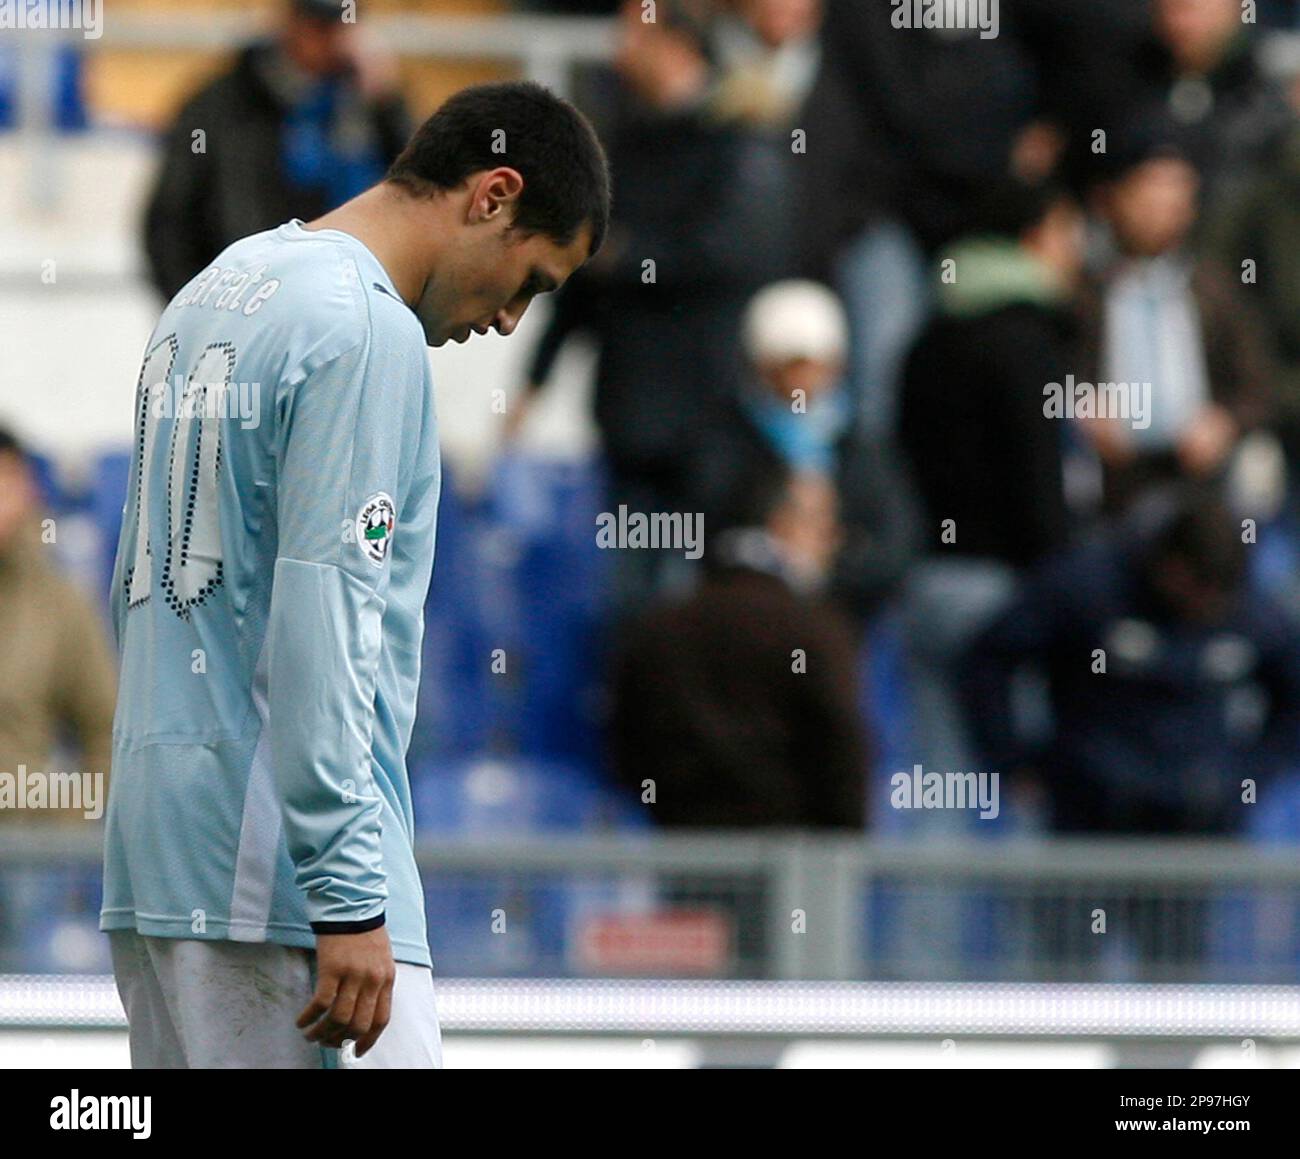 Lazio forward Mauro Matias Zarate, of Argentina, reacts after missing a  penalty during a Serie A soccer match between Lazio and Cagliari at Rome's  Olympic stadium, Sunday Jan. 25, 2009. (AP Photo/Alessandra